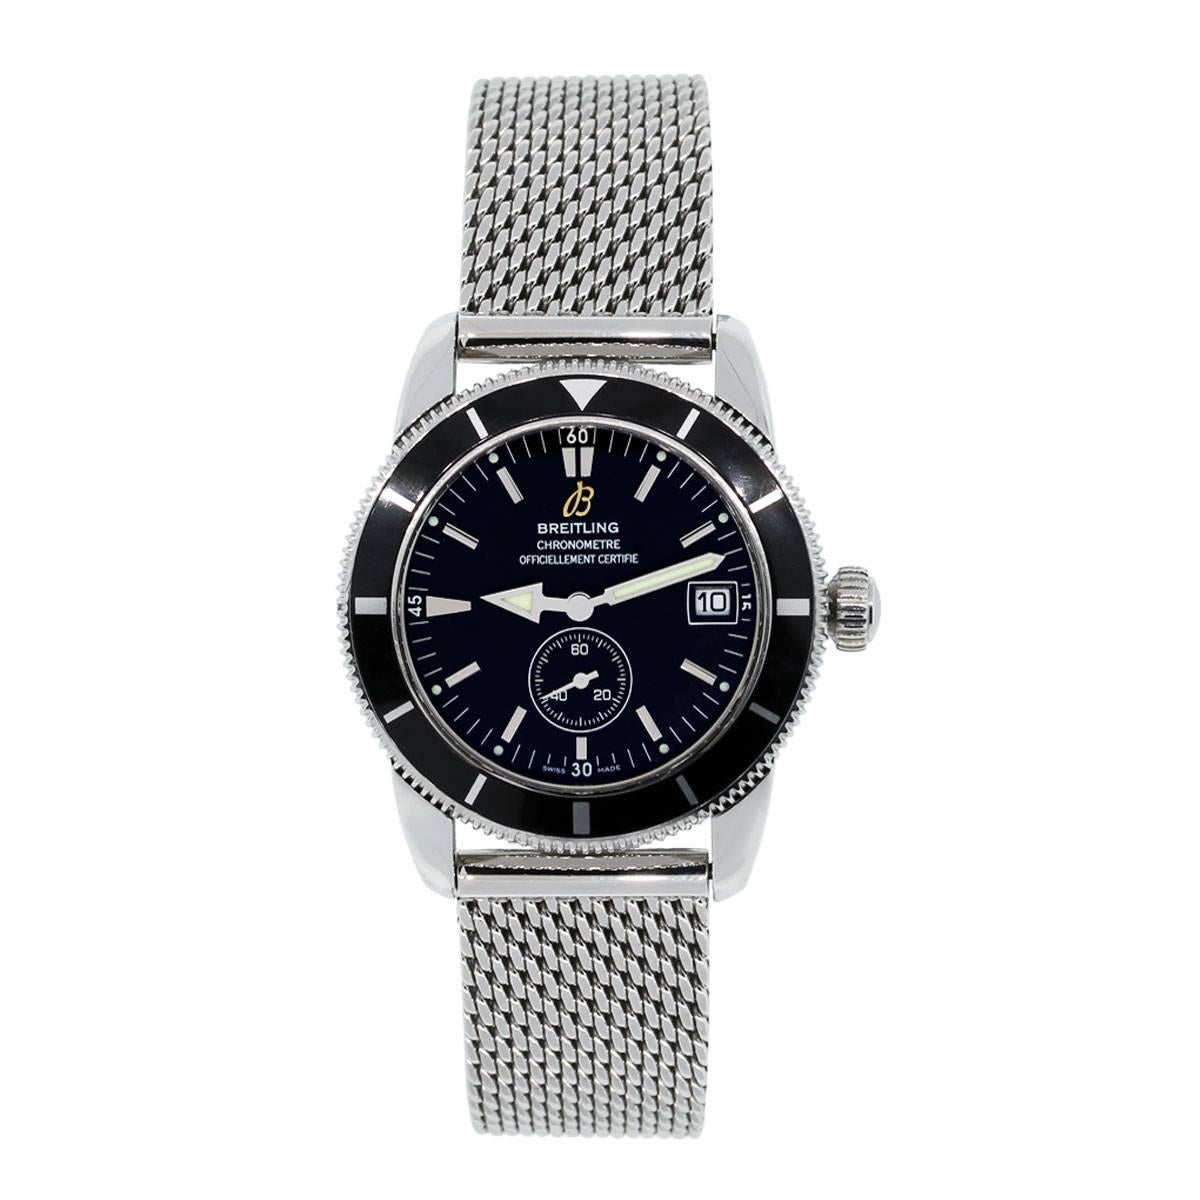 Brand: Breitling
Style: Superocean Heritage
MPN: A37320
Case Material: Stainless steel
Case Diameter: 38mm
Bezel: Stainless steel unidirectional bezel
Dial: Black dial with single sub dial and date window at 3 o'clock position
Bracelet: